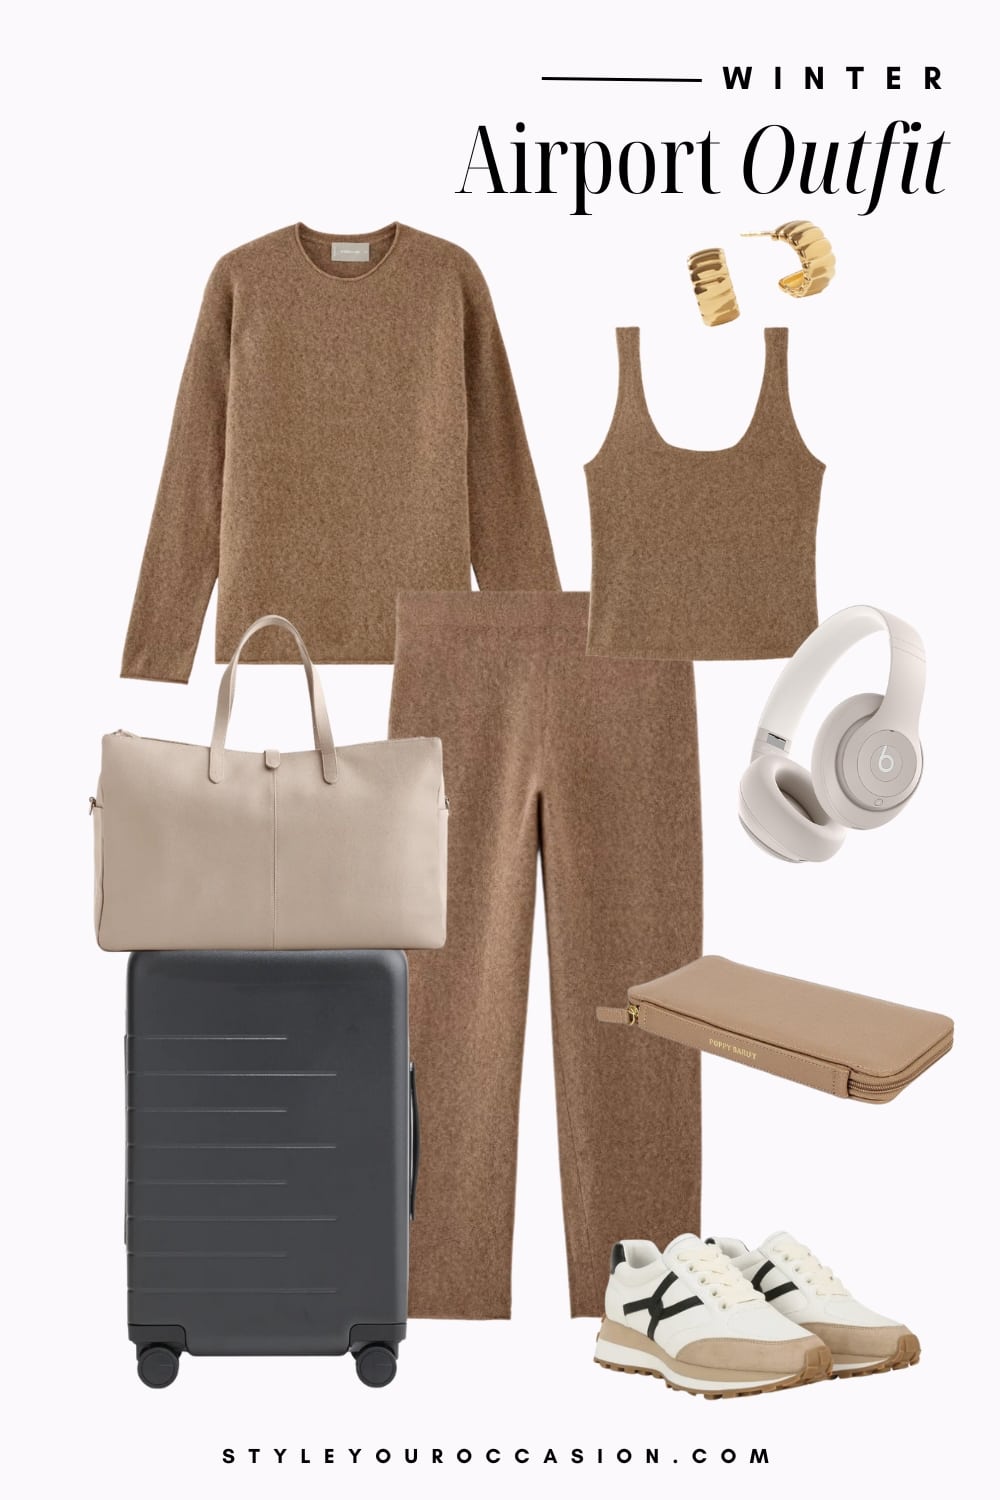 Graphic of a cozy winter airport outfit including a matching sweat pant and sweater set.